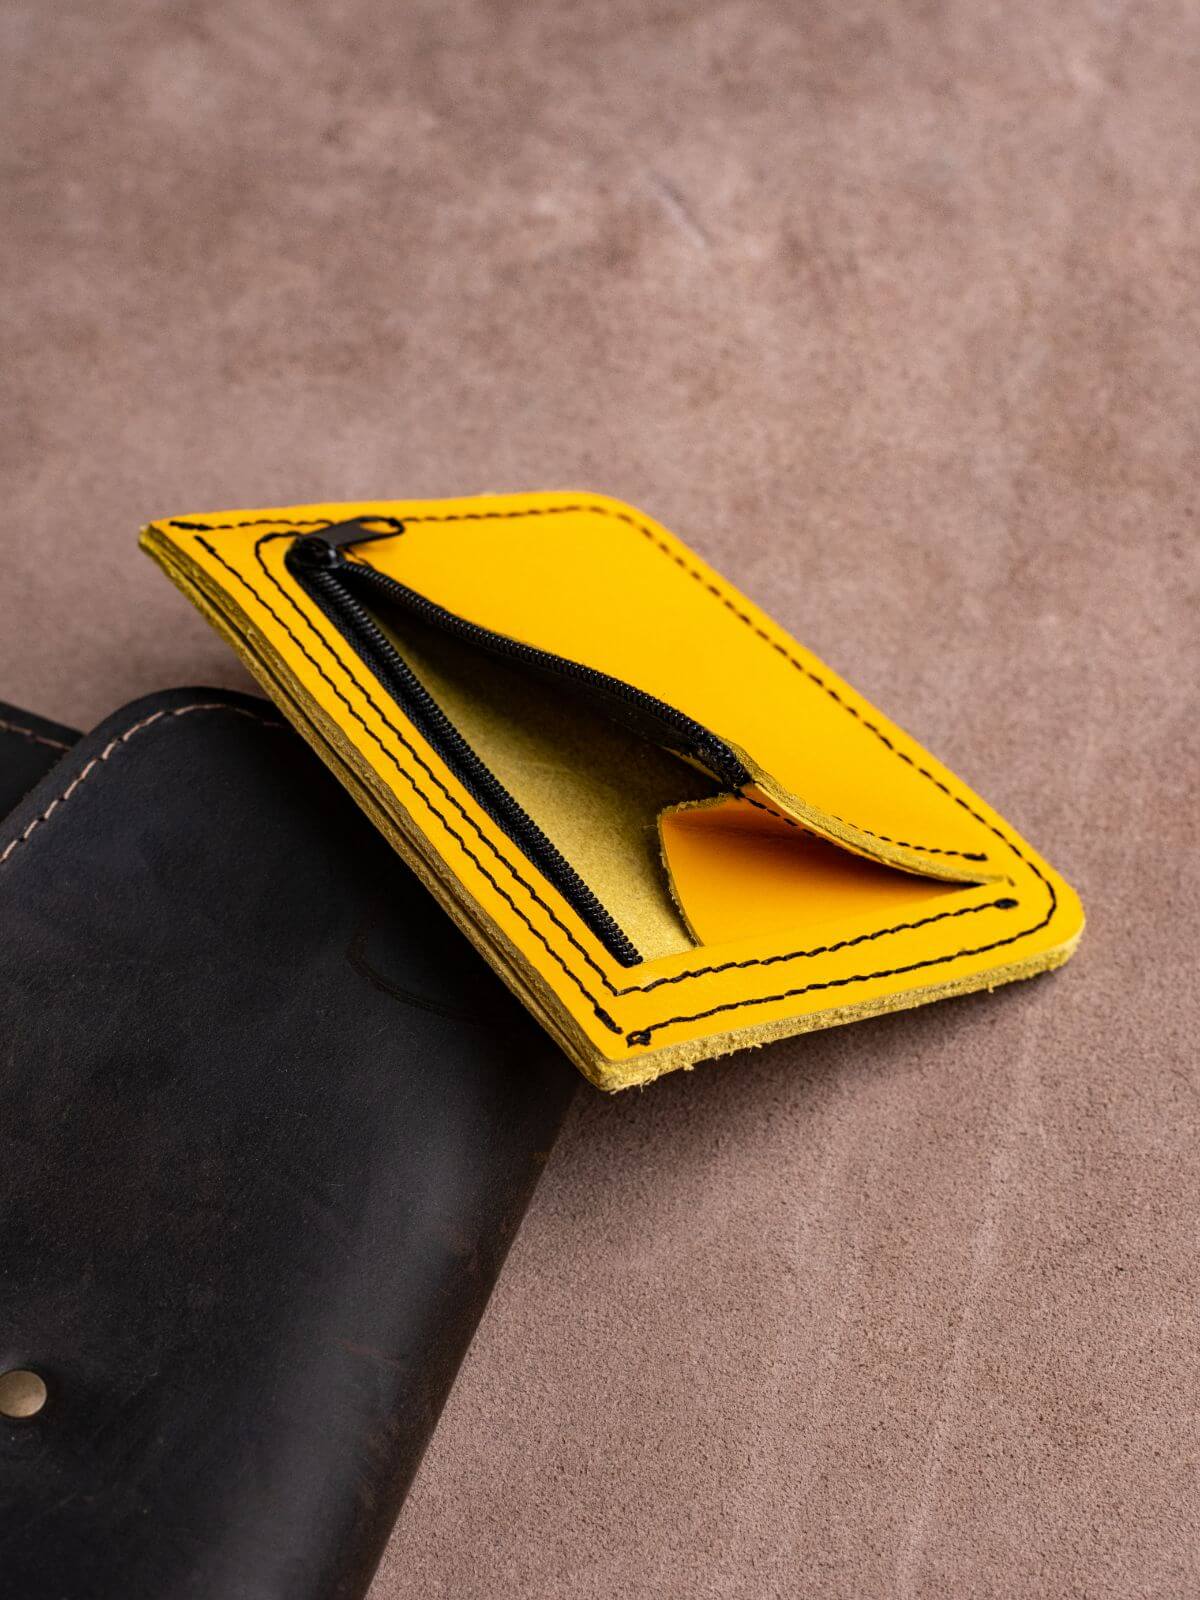 leather wallet 